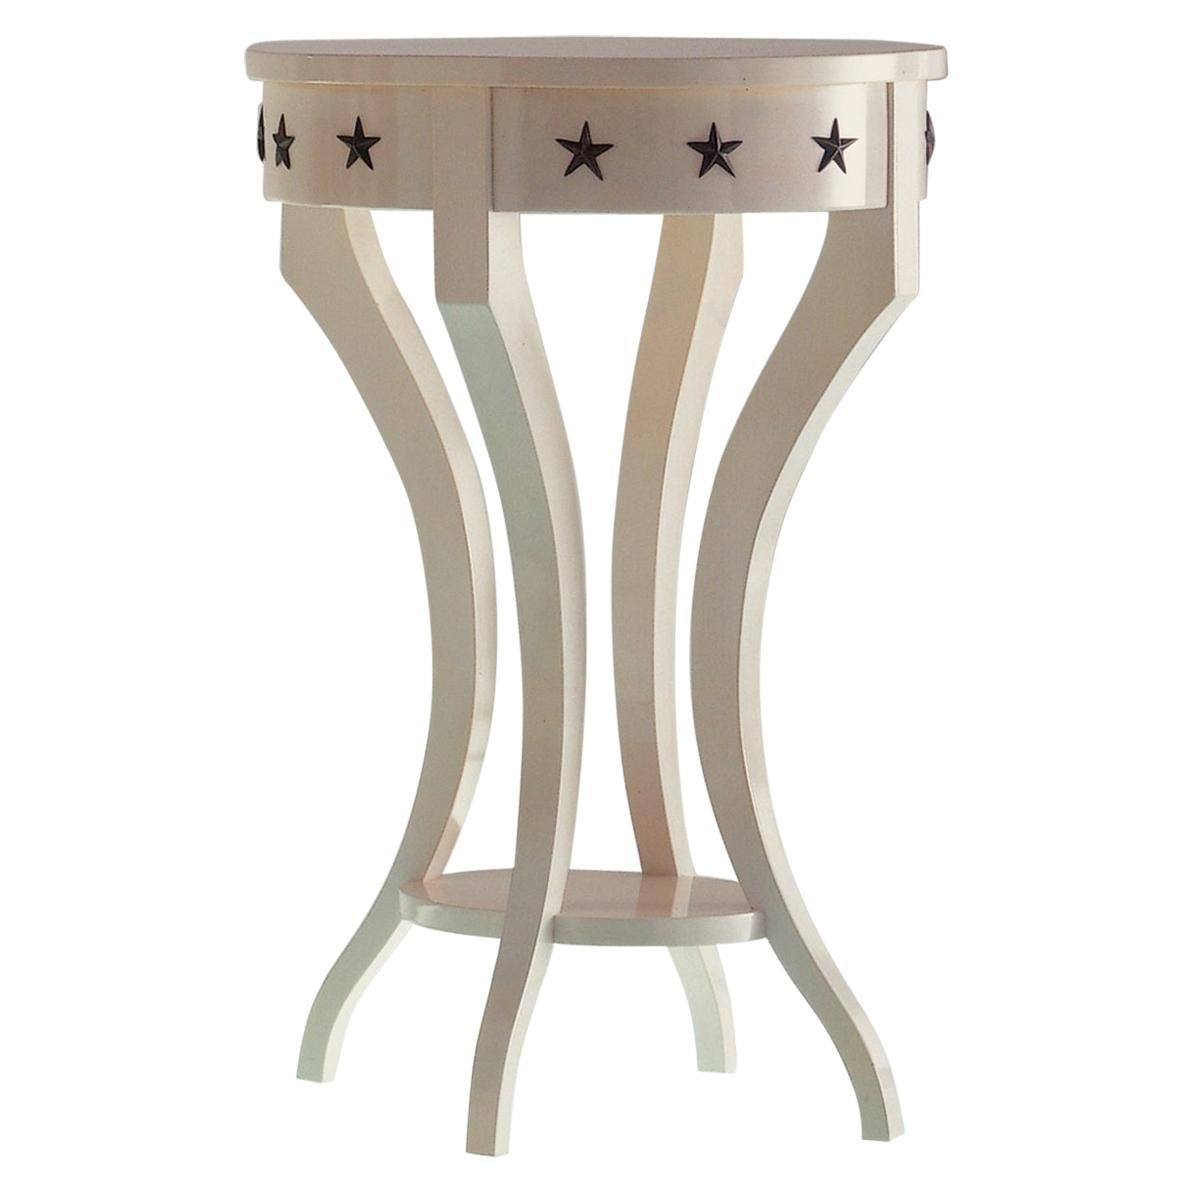 DEEPLY Oval White Shiny Occasional Table With Stars Bronze Decorations on Top